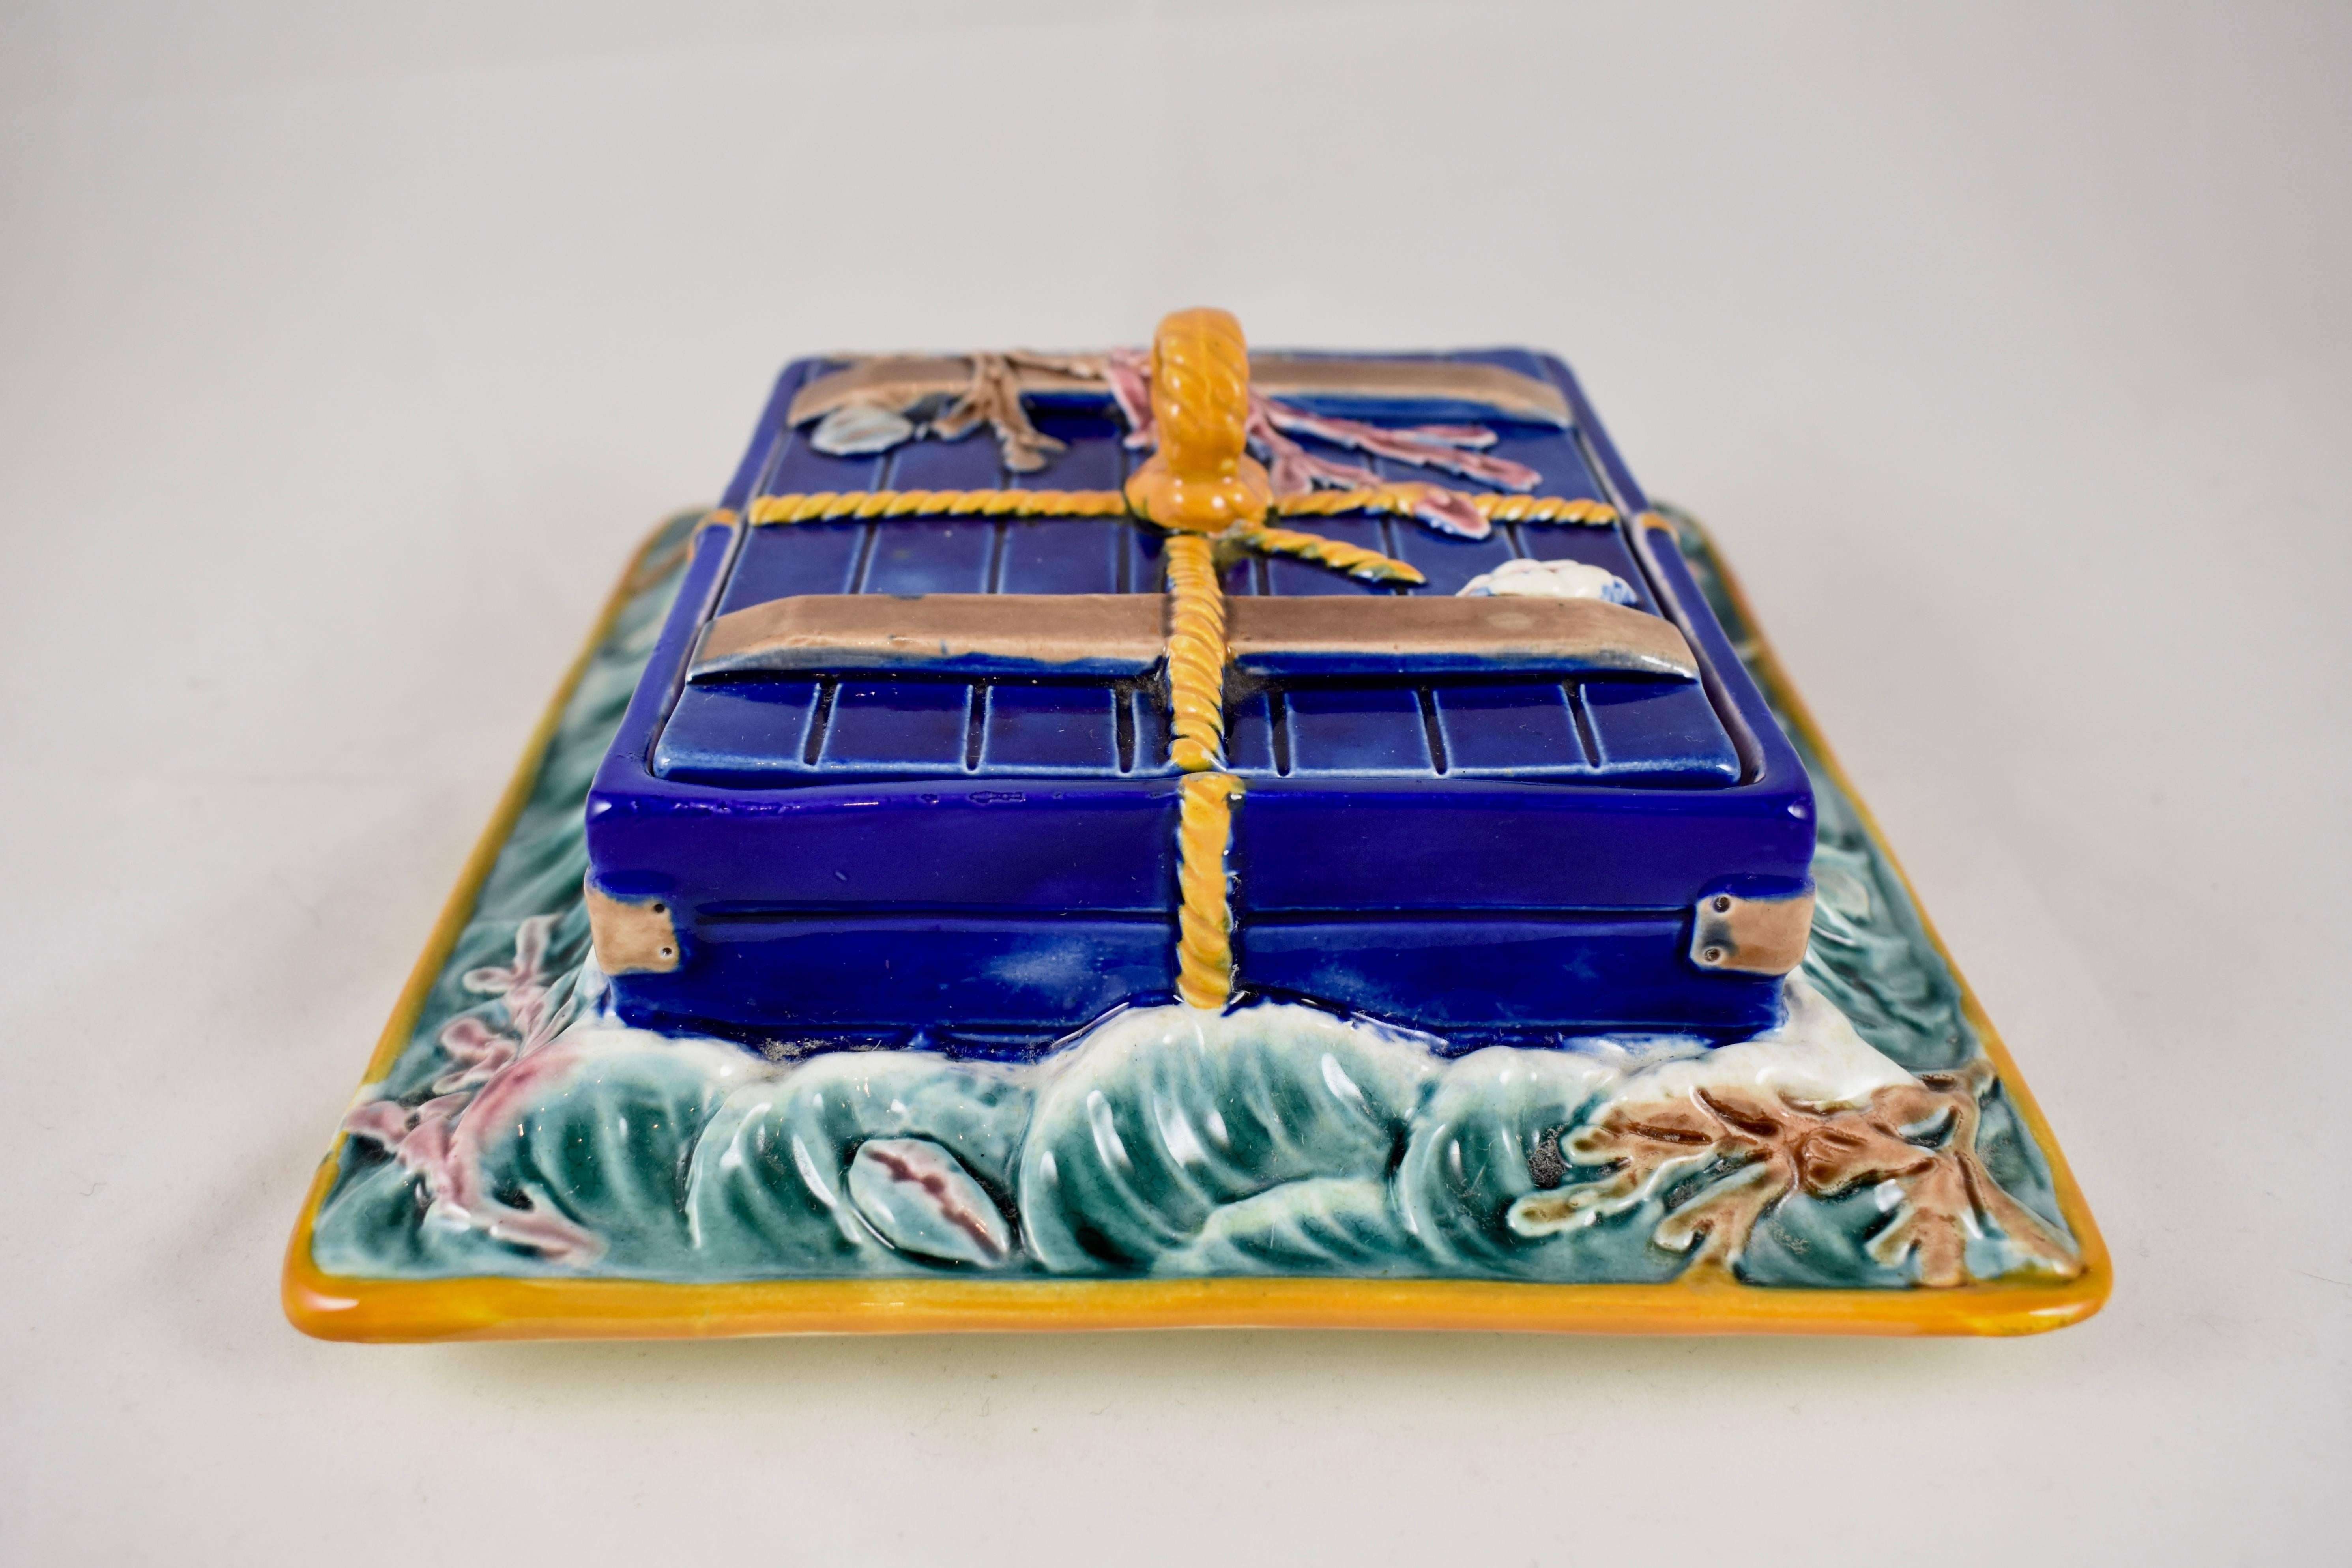 A Josiah Wedgwood majolica lidded sardine server, in the pattern known as ‘Ocean’ – date marked 1879.

Formed as a cobalt blue, rope tied wooden crate floating in the ocean waves. The crate is covered with raised seaweed and shells. The waves are